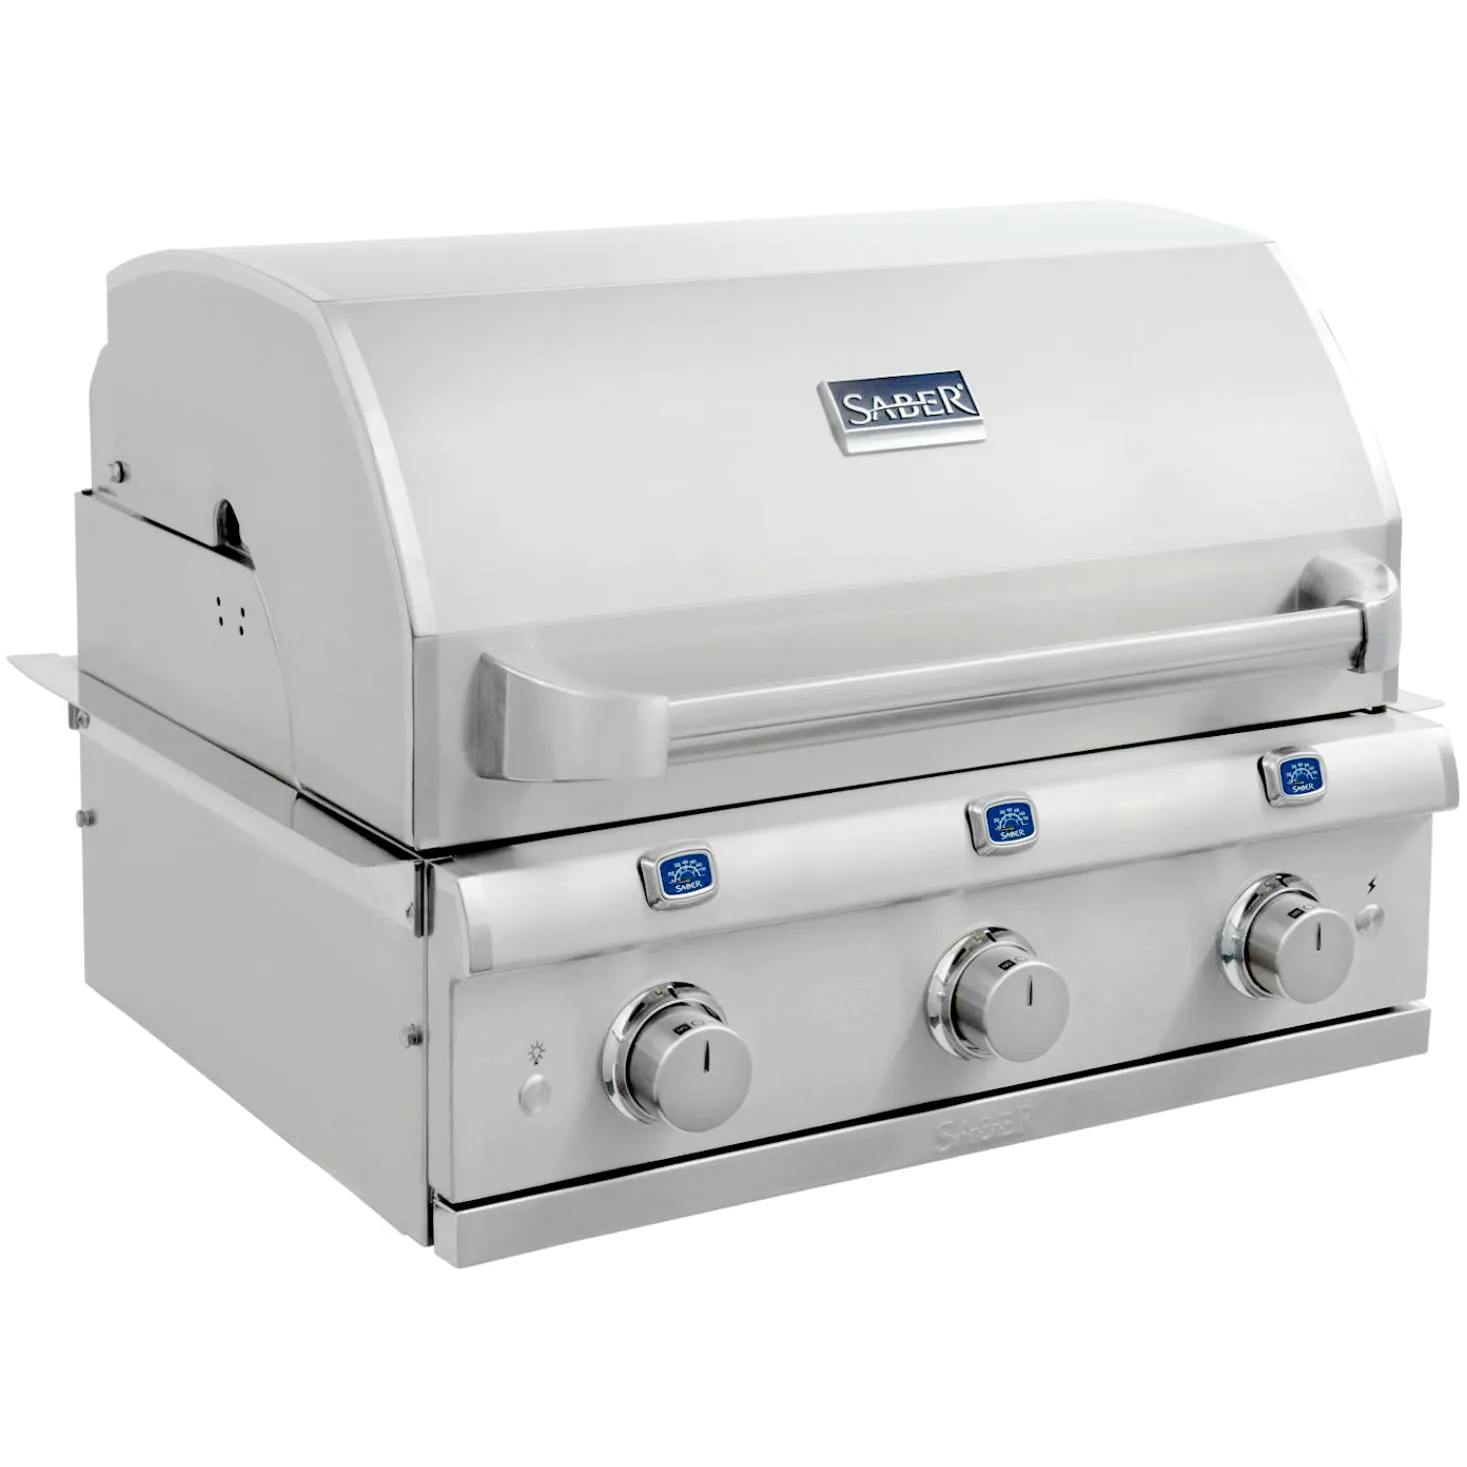 Saber Elite 1500 Built-in Gas Grill · 32 in. · Natural Gas